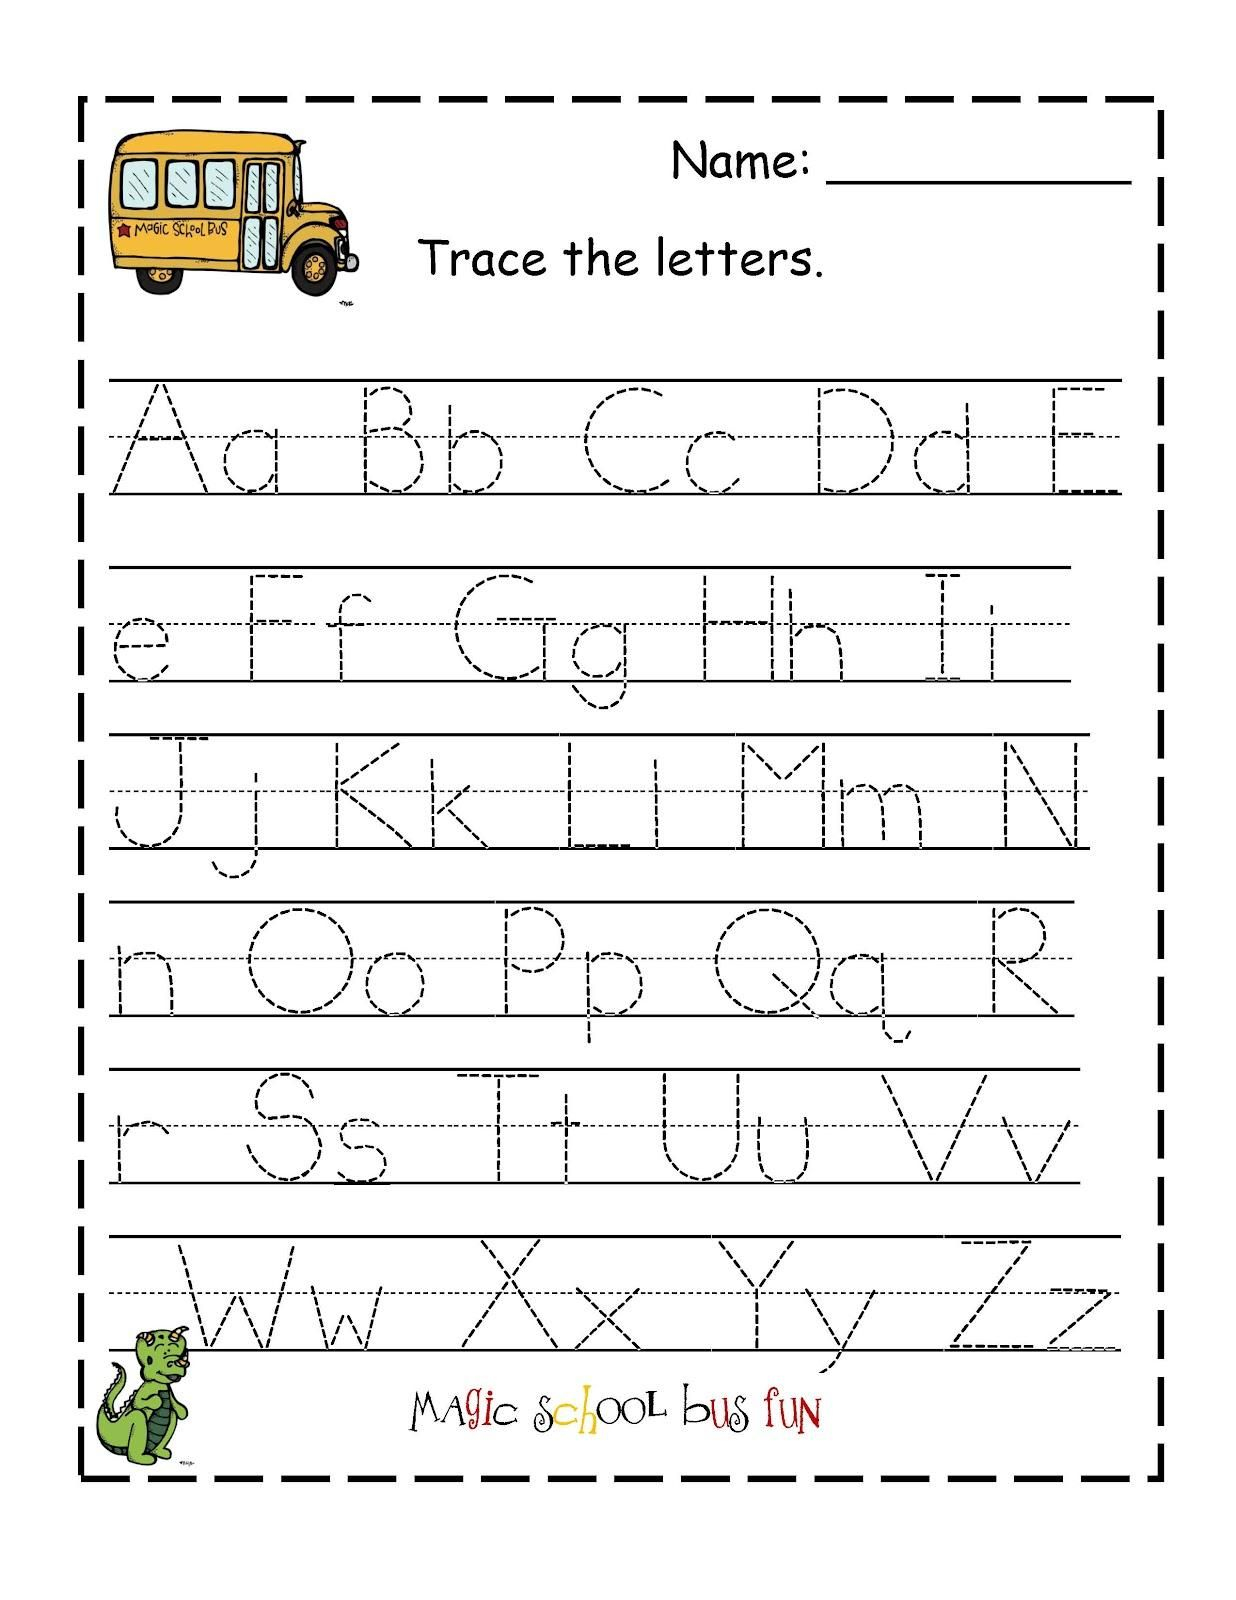 51 Alphabet Worksheets For 4 Year Olds | Handwriting within Letter Tracing 4 Year Old